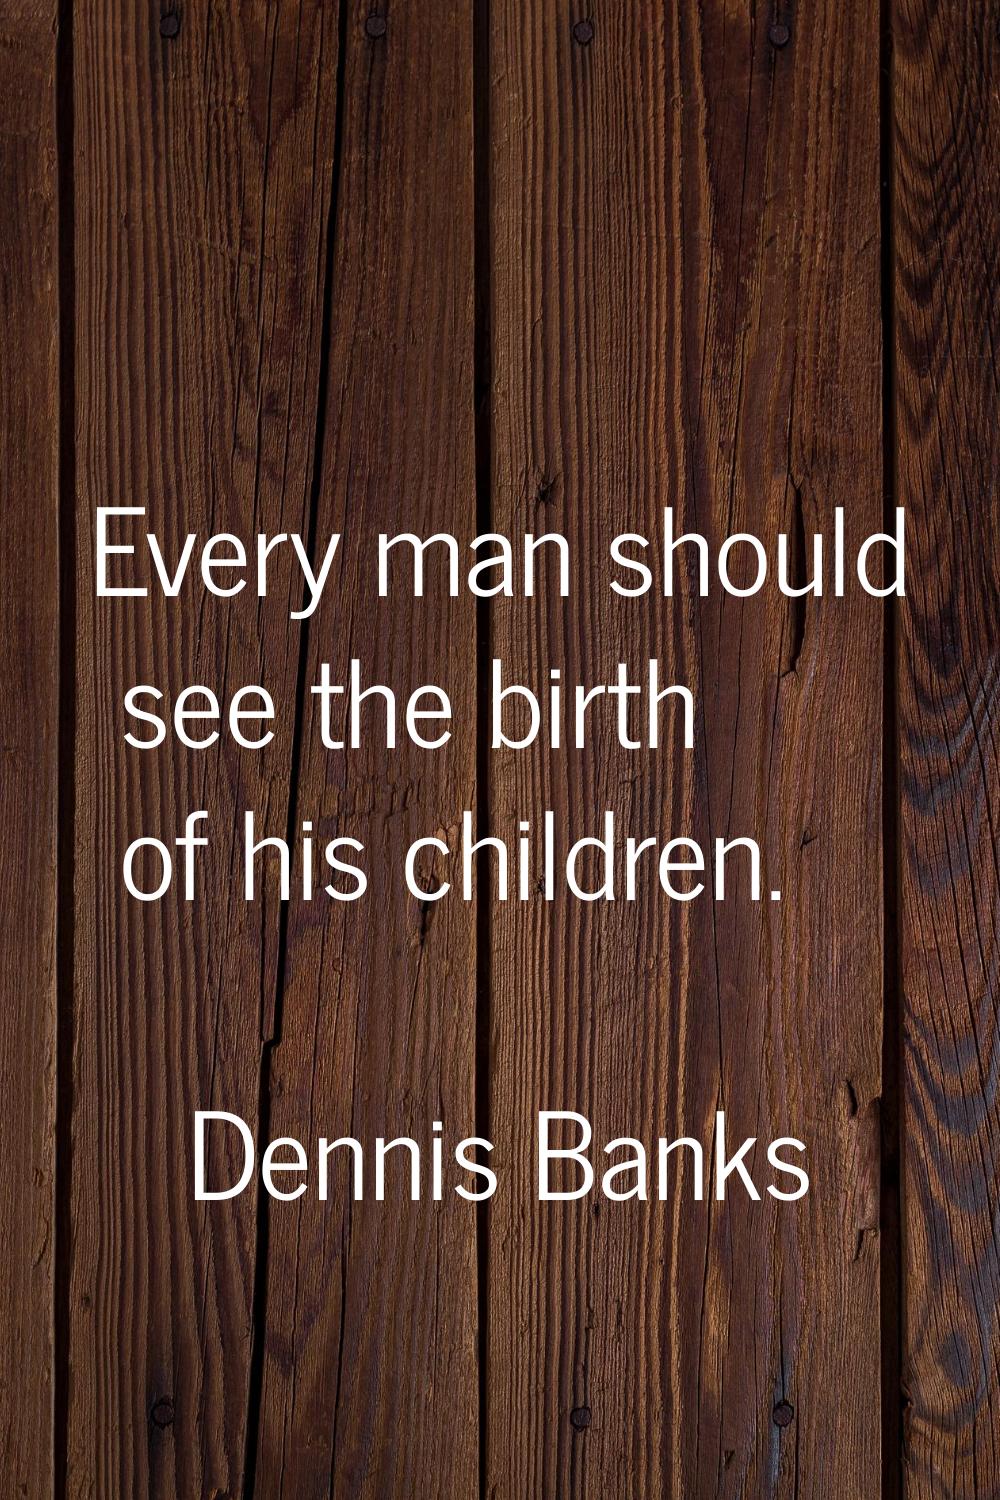 Every man should see the birth of his children.